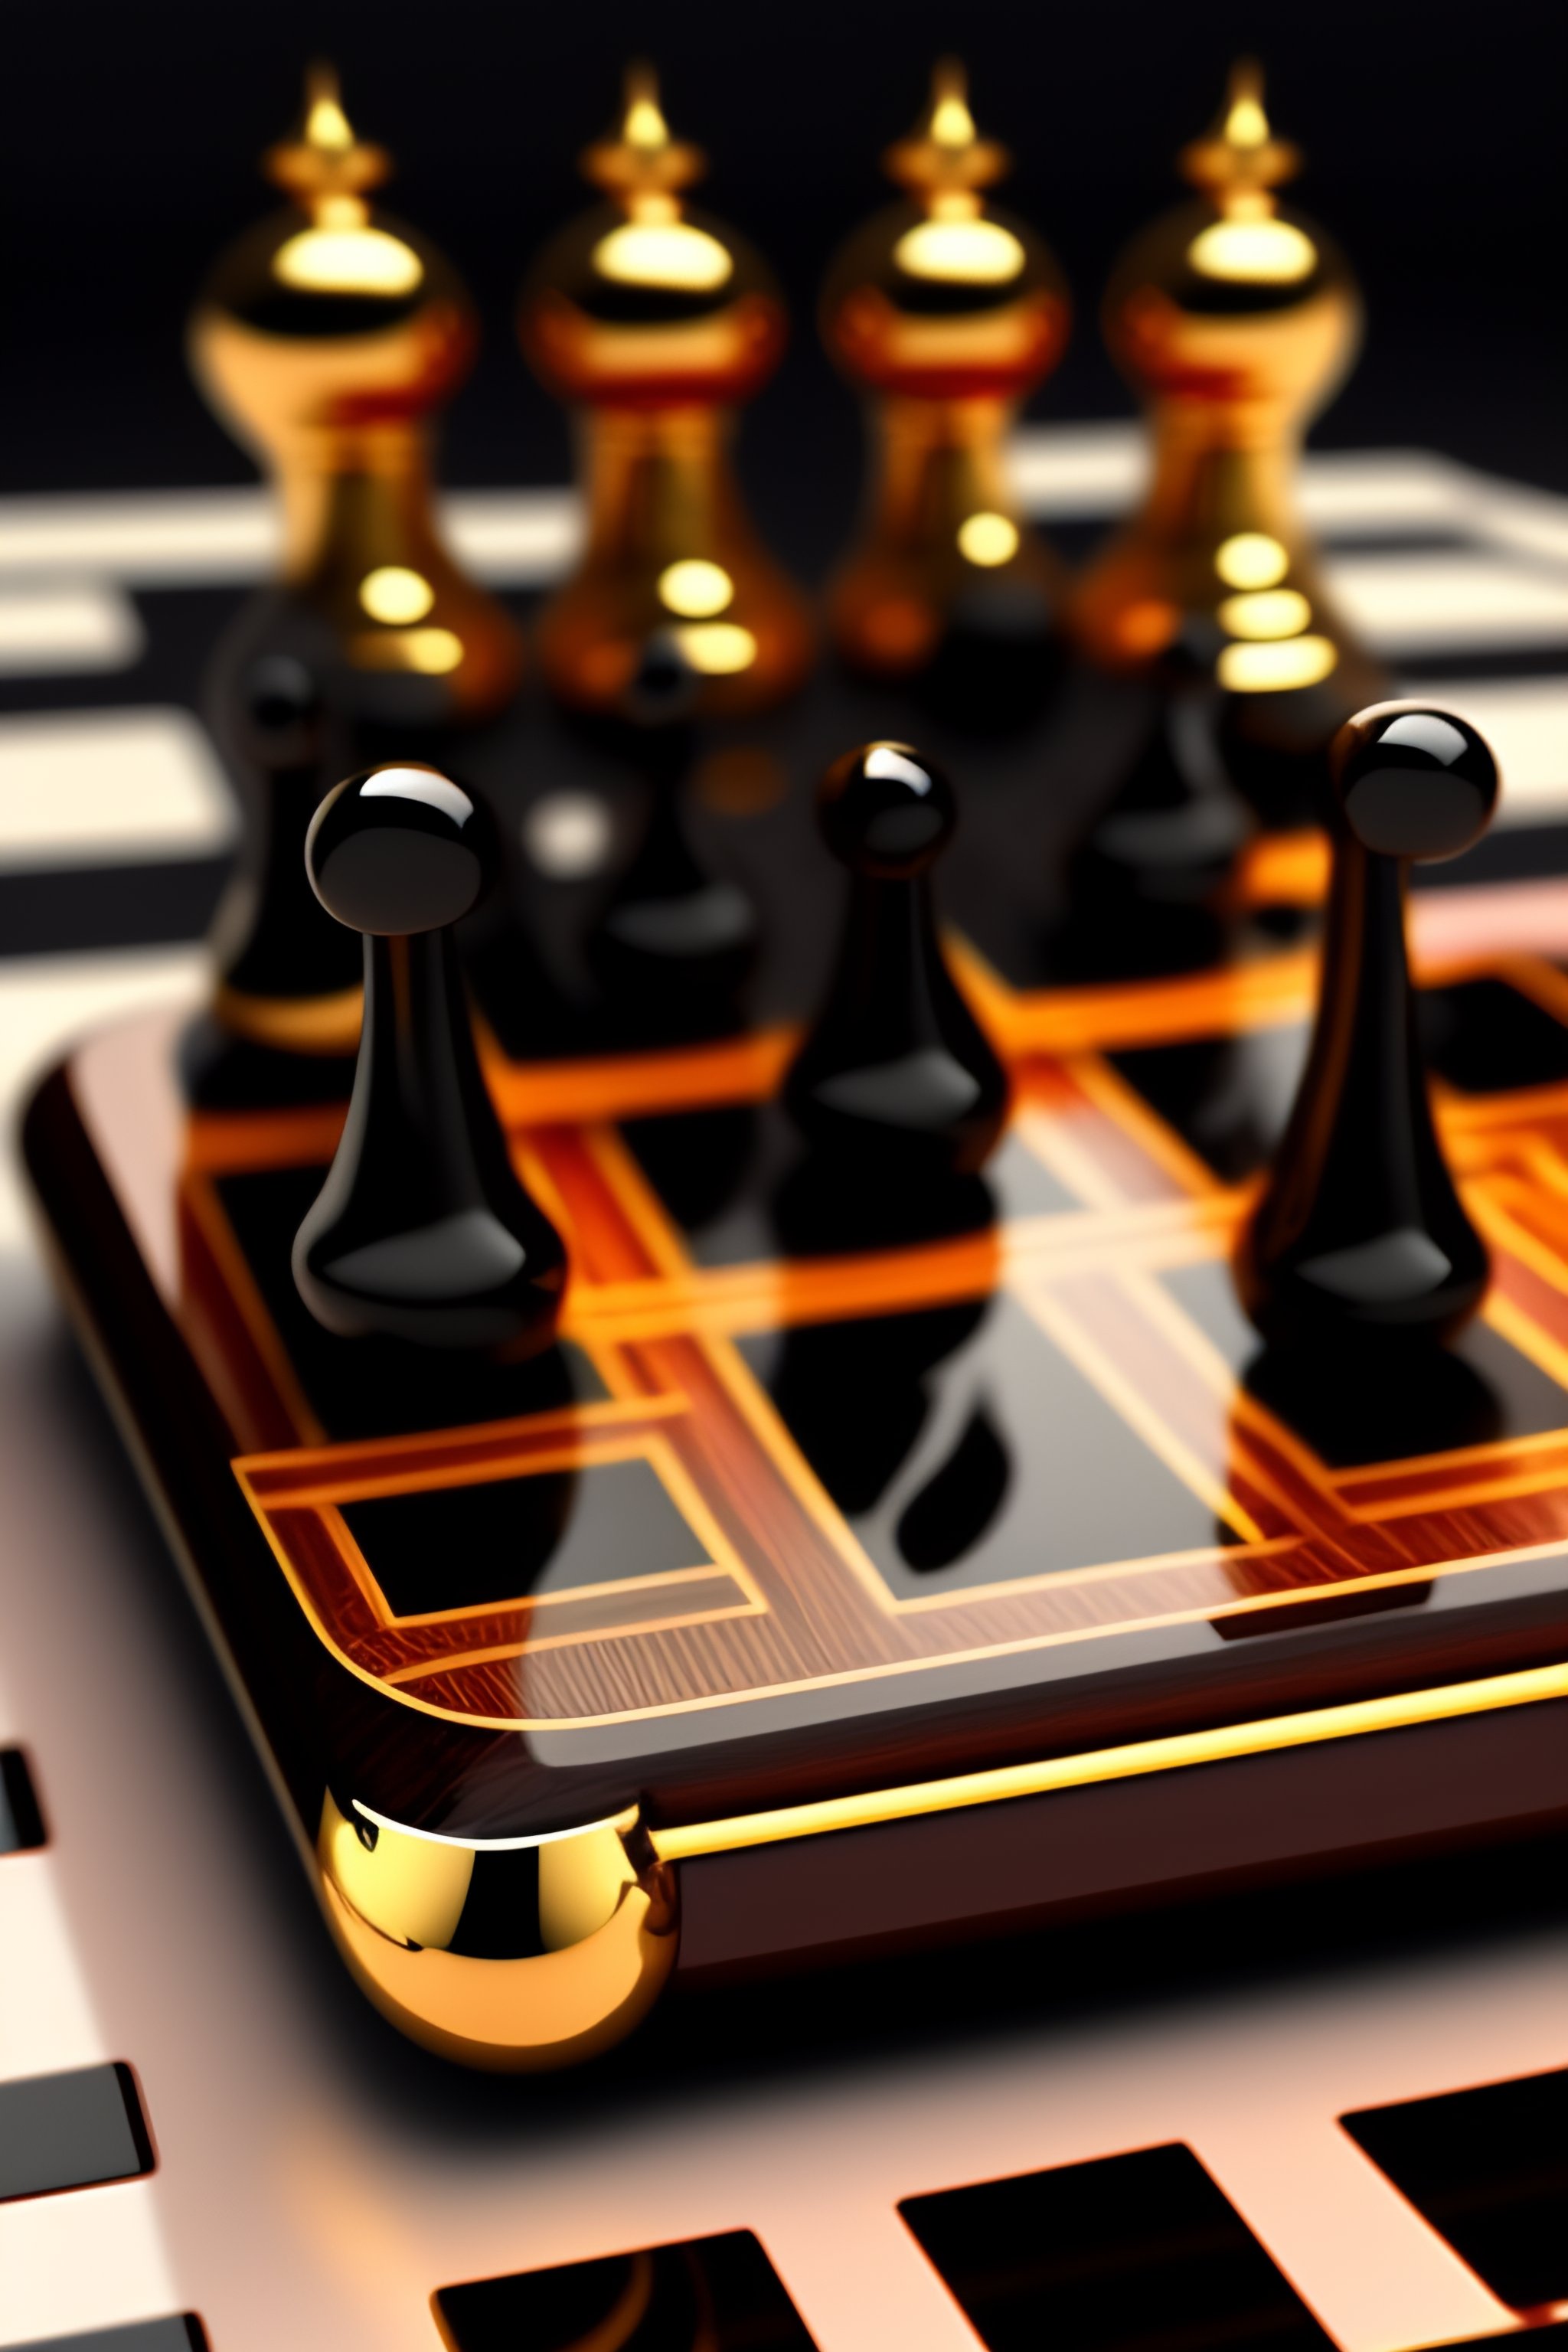 Lexica - Cyber Chess board with a hand about to hit the king down to win  the game. The hand is also futuristic with 1 & 0 to form the hand